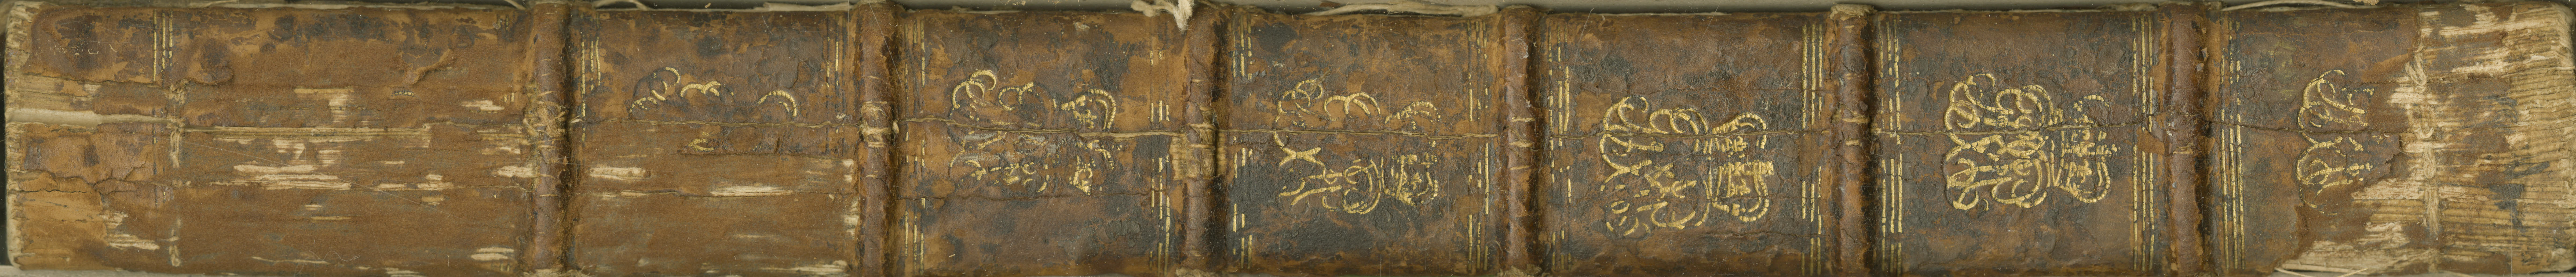 Scan of the book spine before leather removal